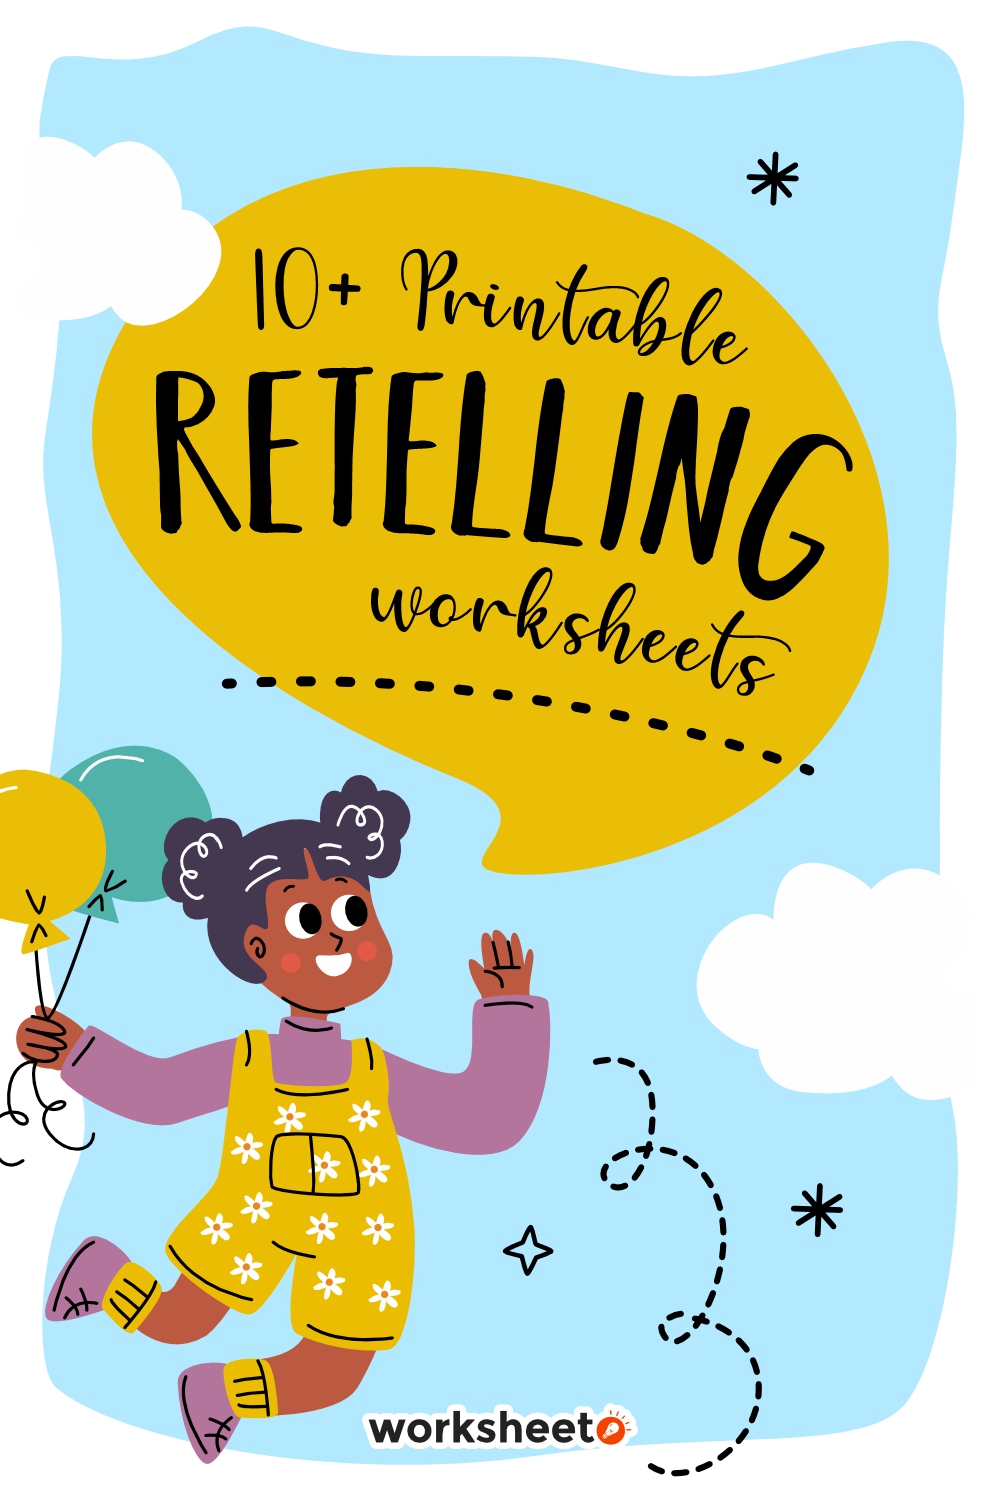 17 Images of Printable Retelling Worksheets